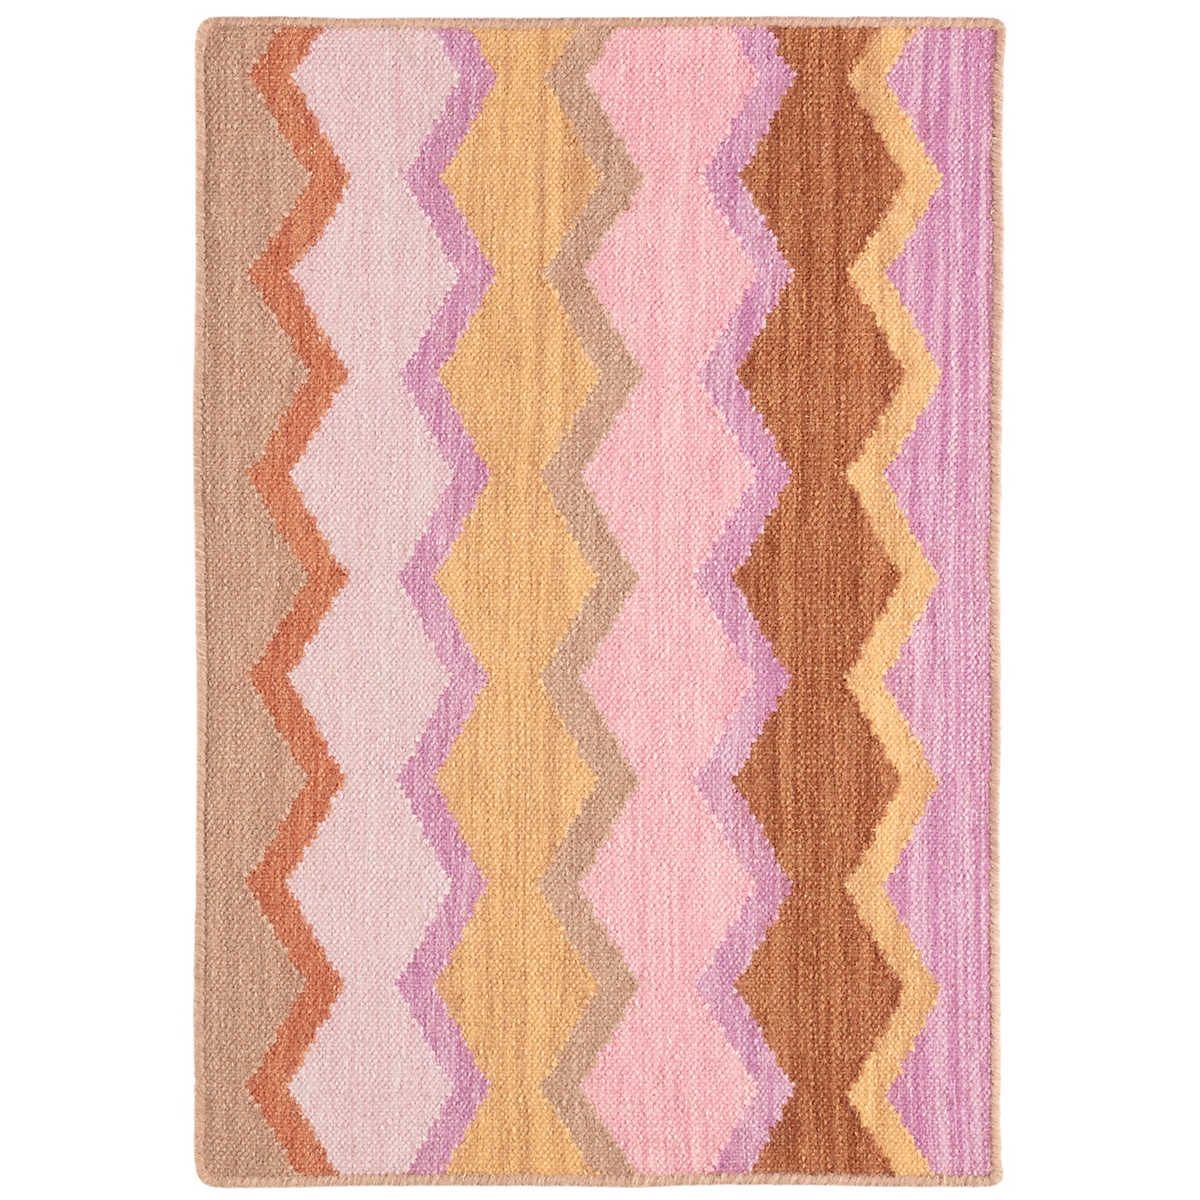 Safety Net Spice Woven Wool Rug | Annie Selke